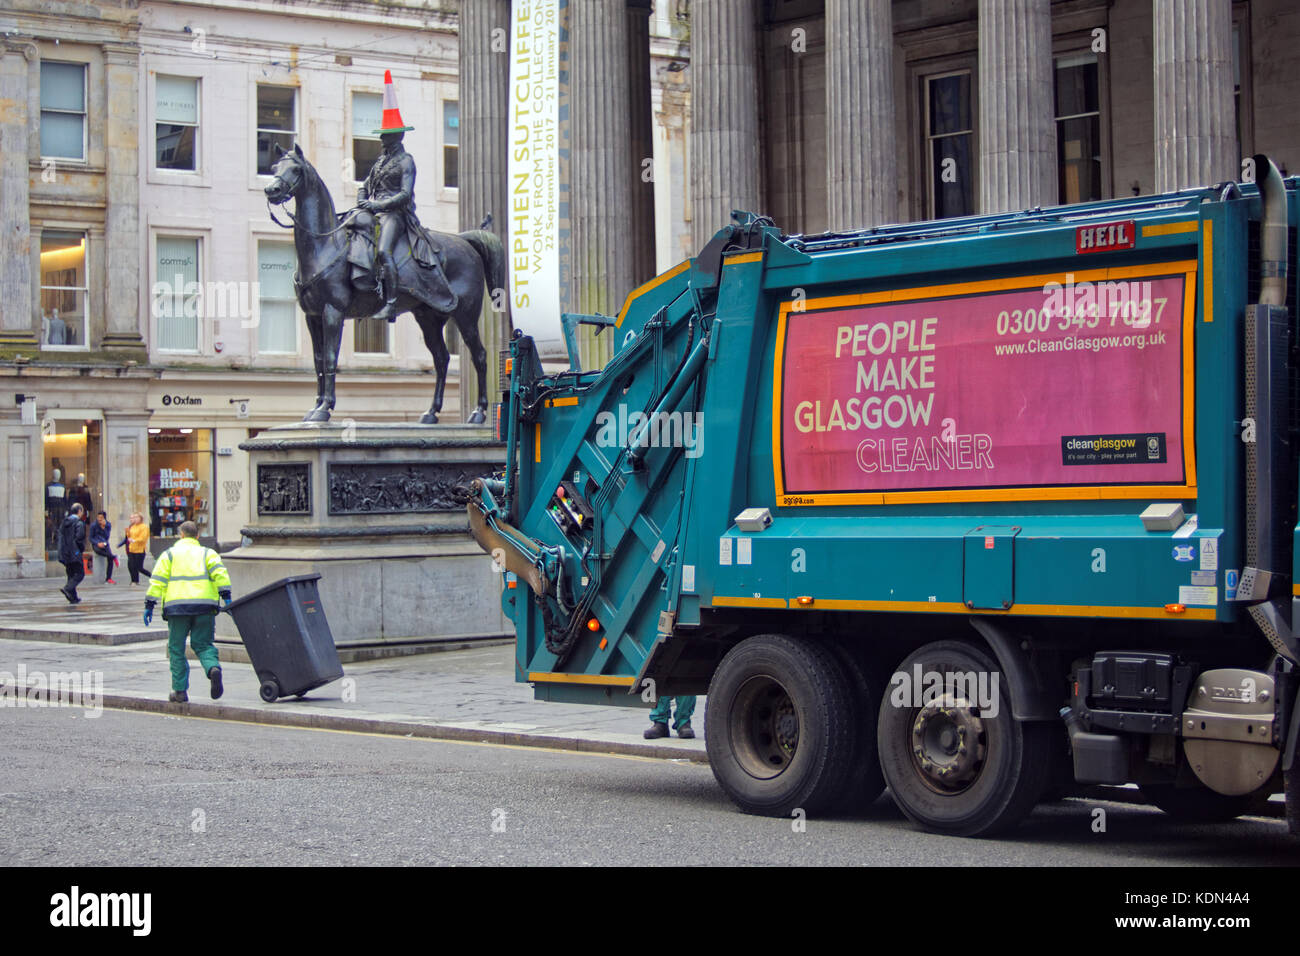 binmen with dustcart at the cone head man duke of wellington statue Gallery of Modern Art, Royal Exchange Square, people make glasgow cleaner logo Stock Photo